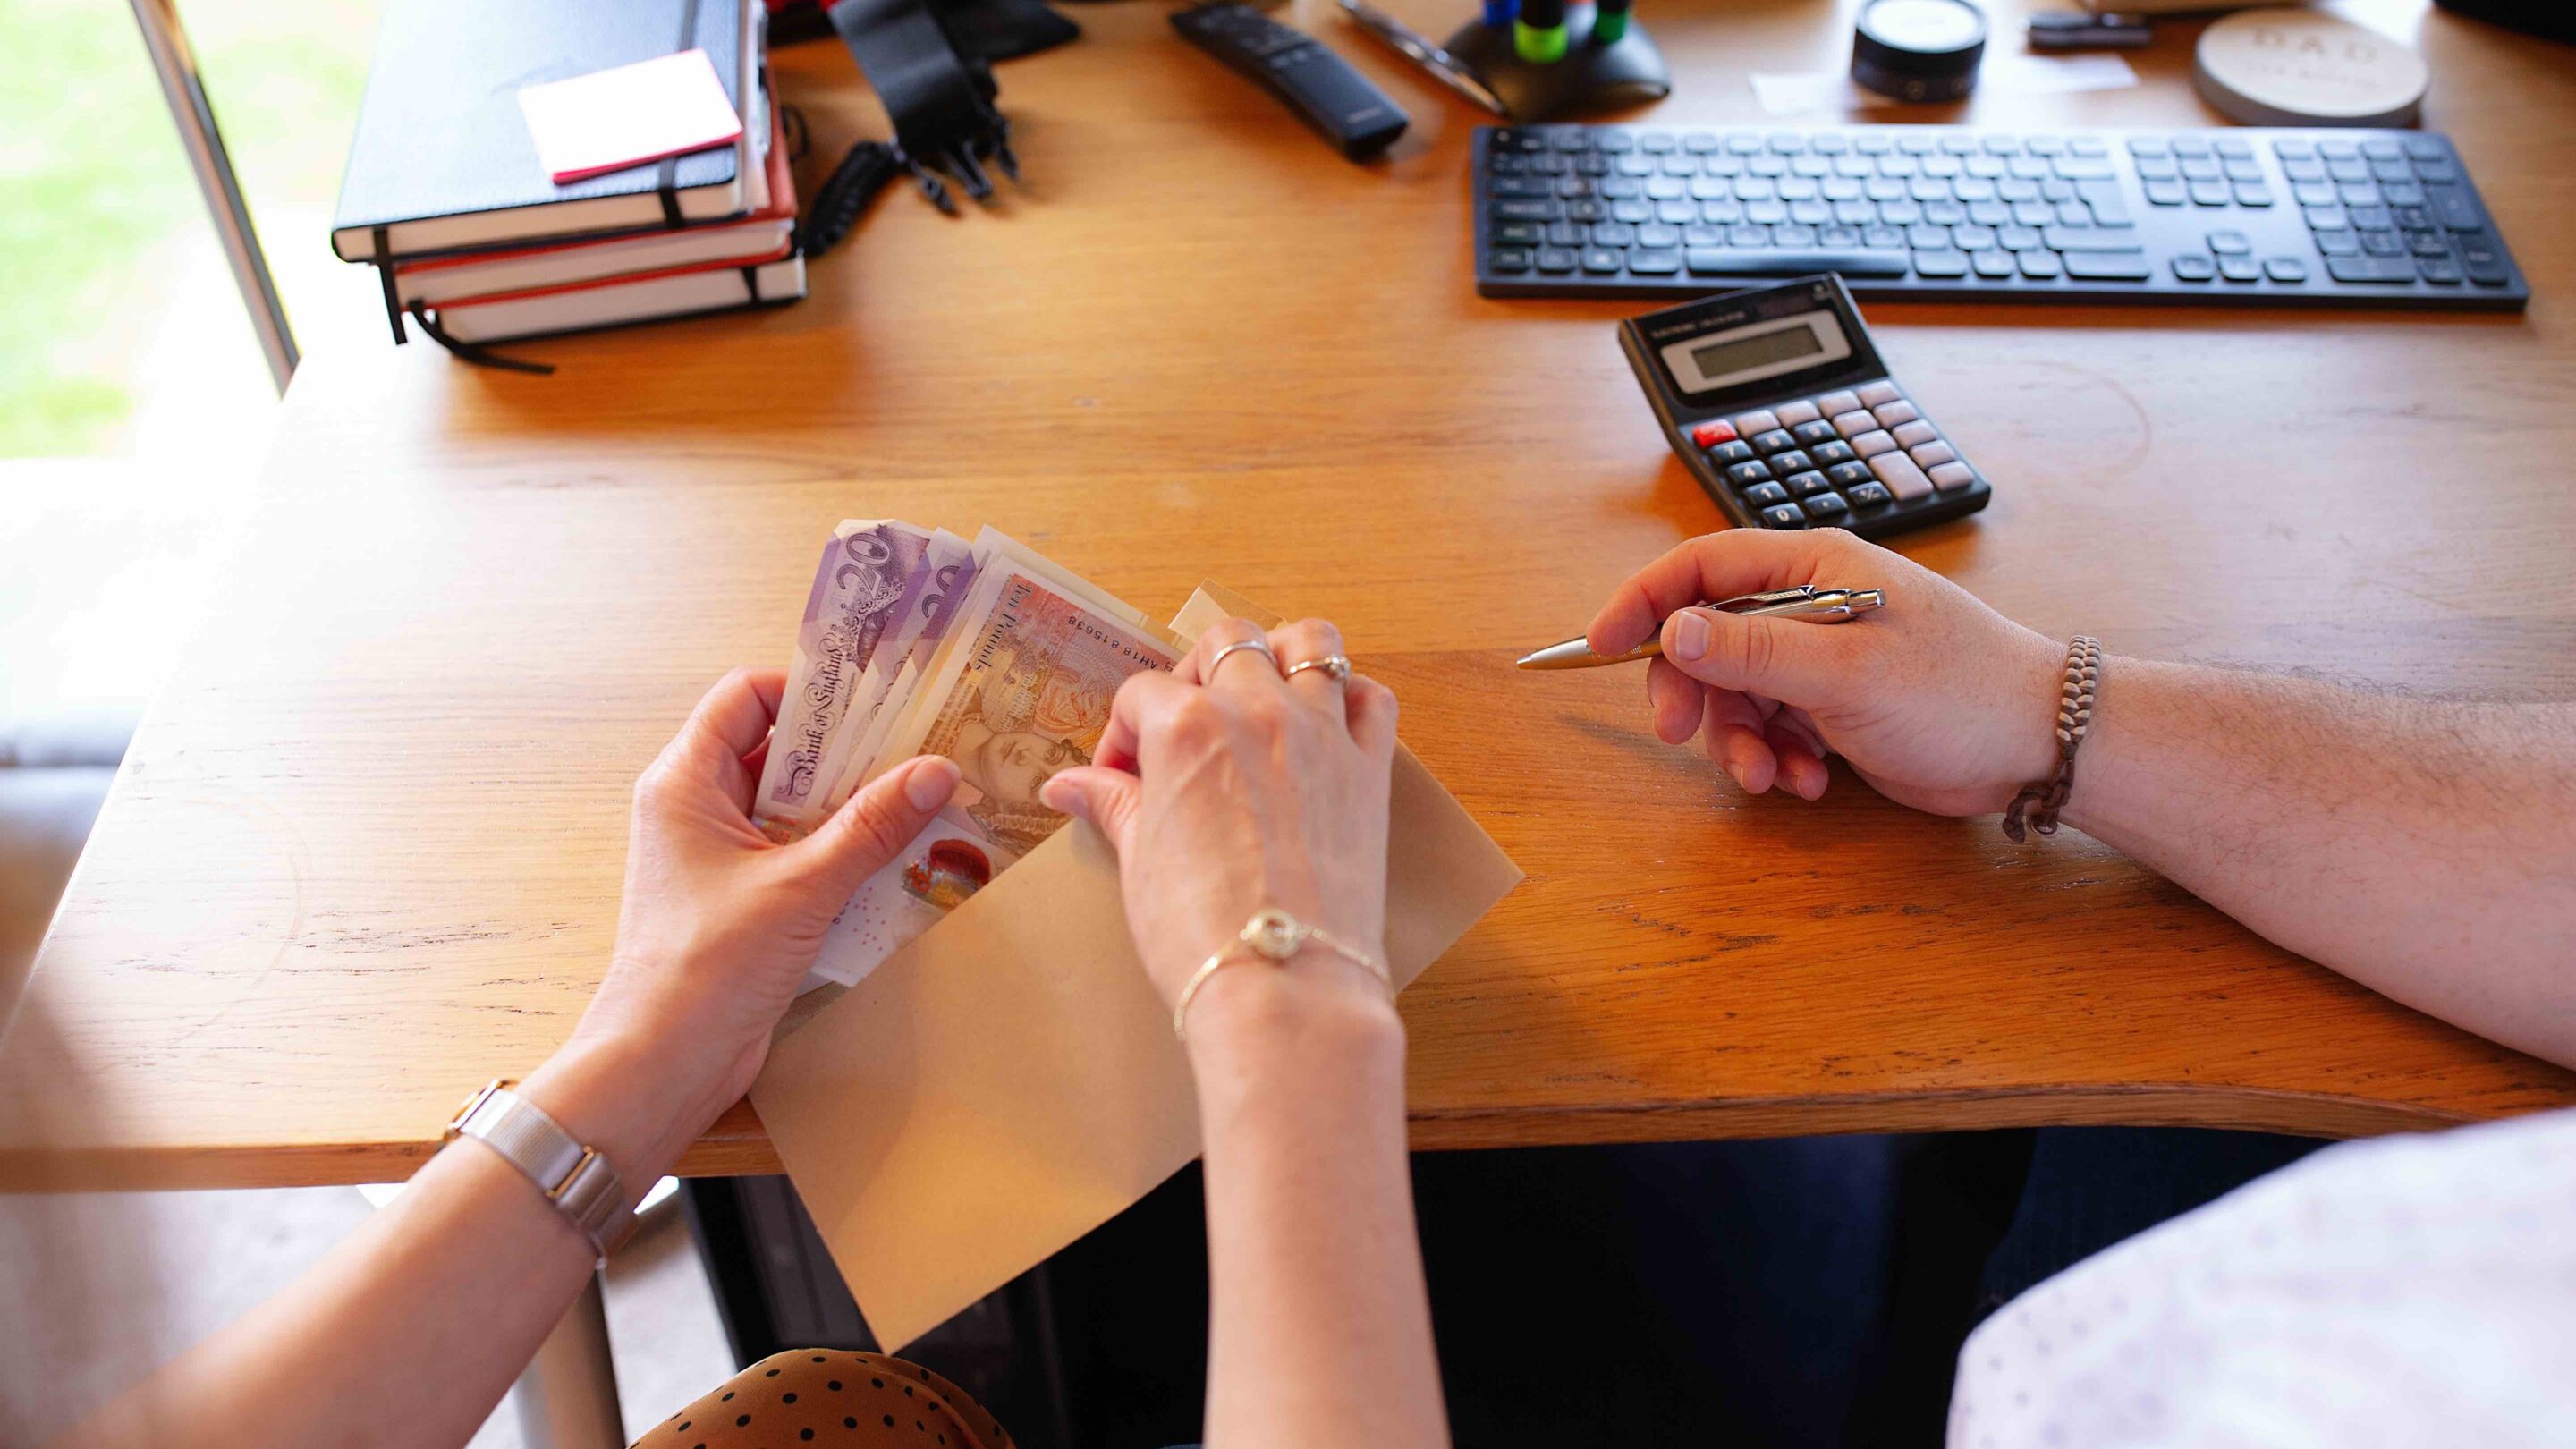 female hands holding a long brown envelope with a handful of £20 and £10 notes, male hand next to her holding a silver pen with a calculator placed next to him.